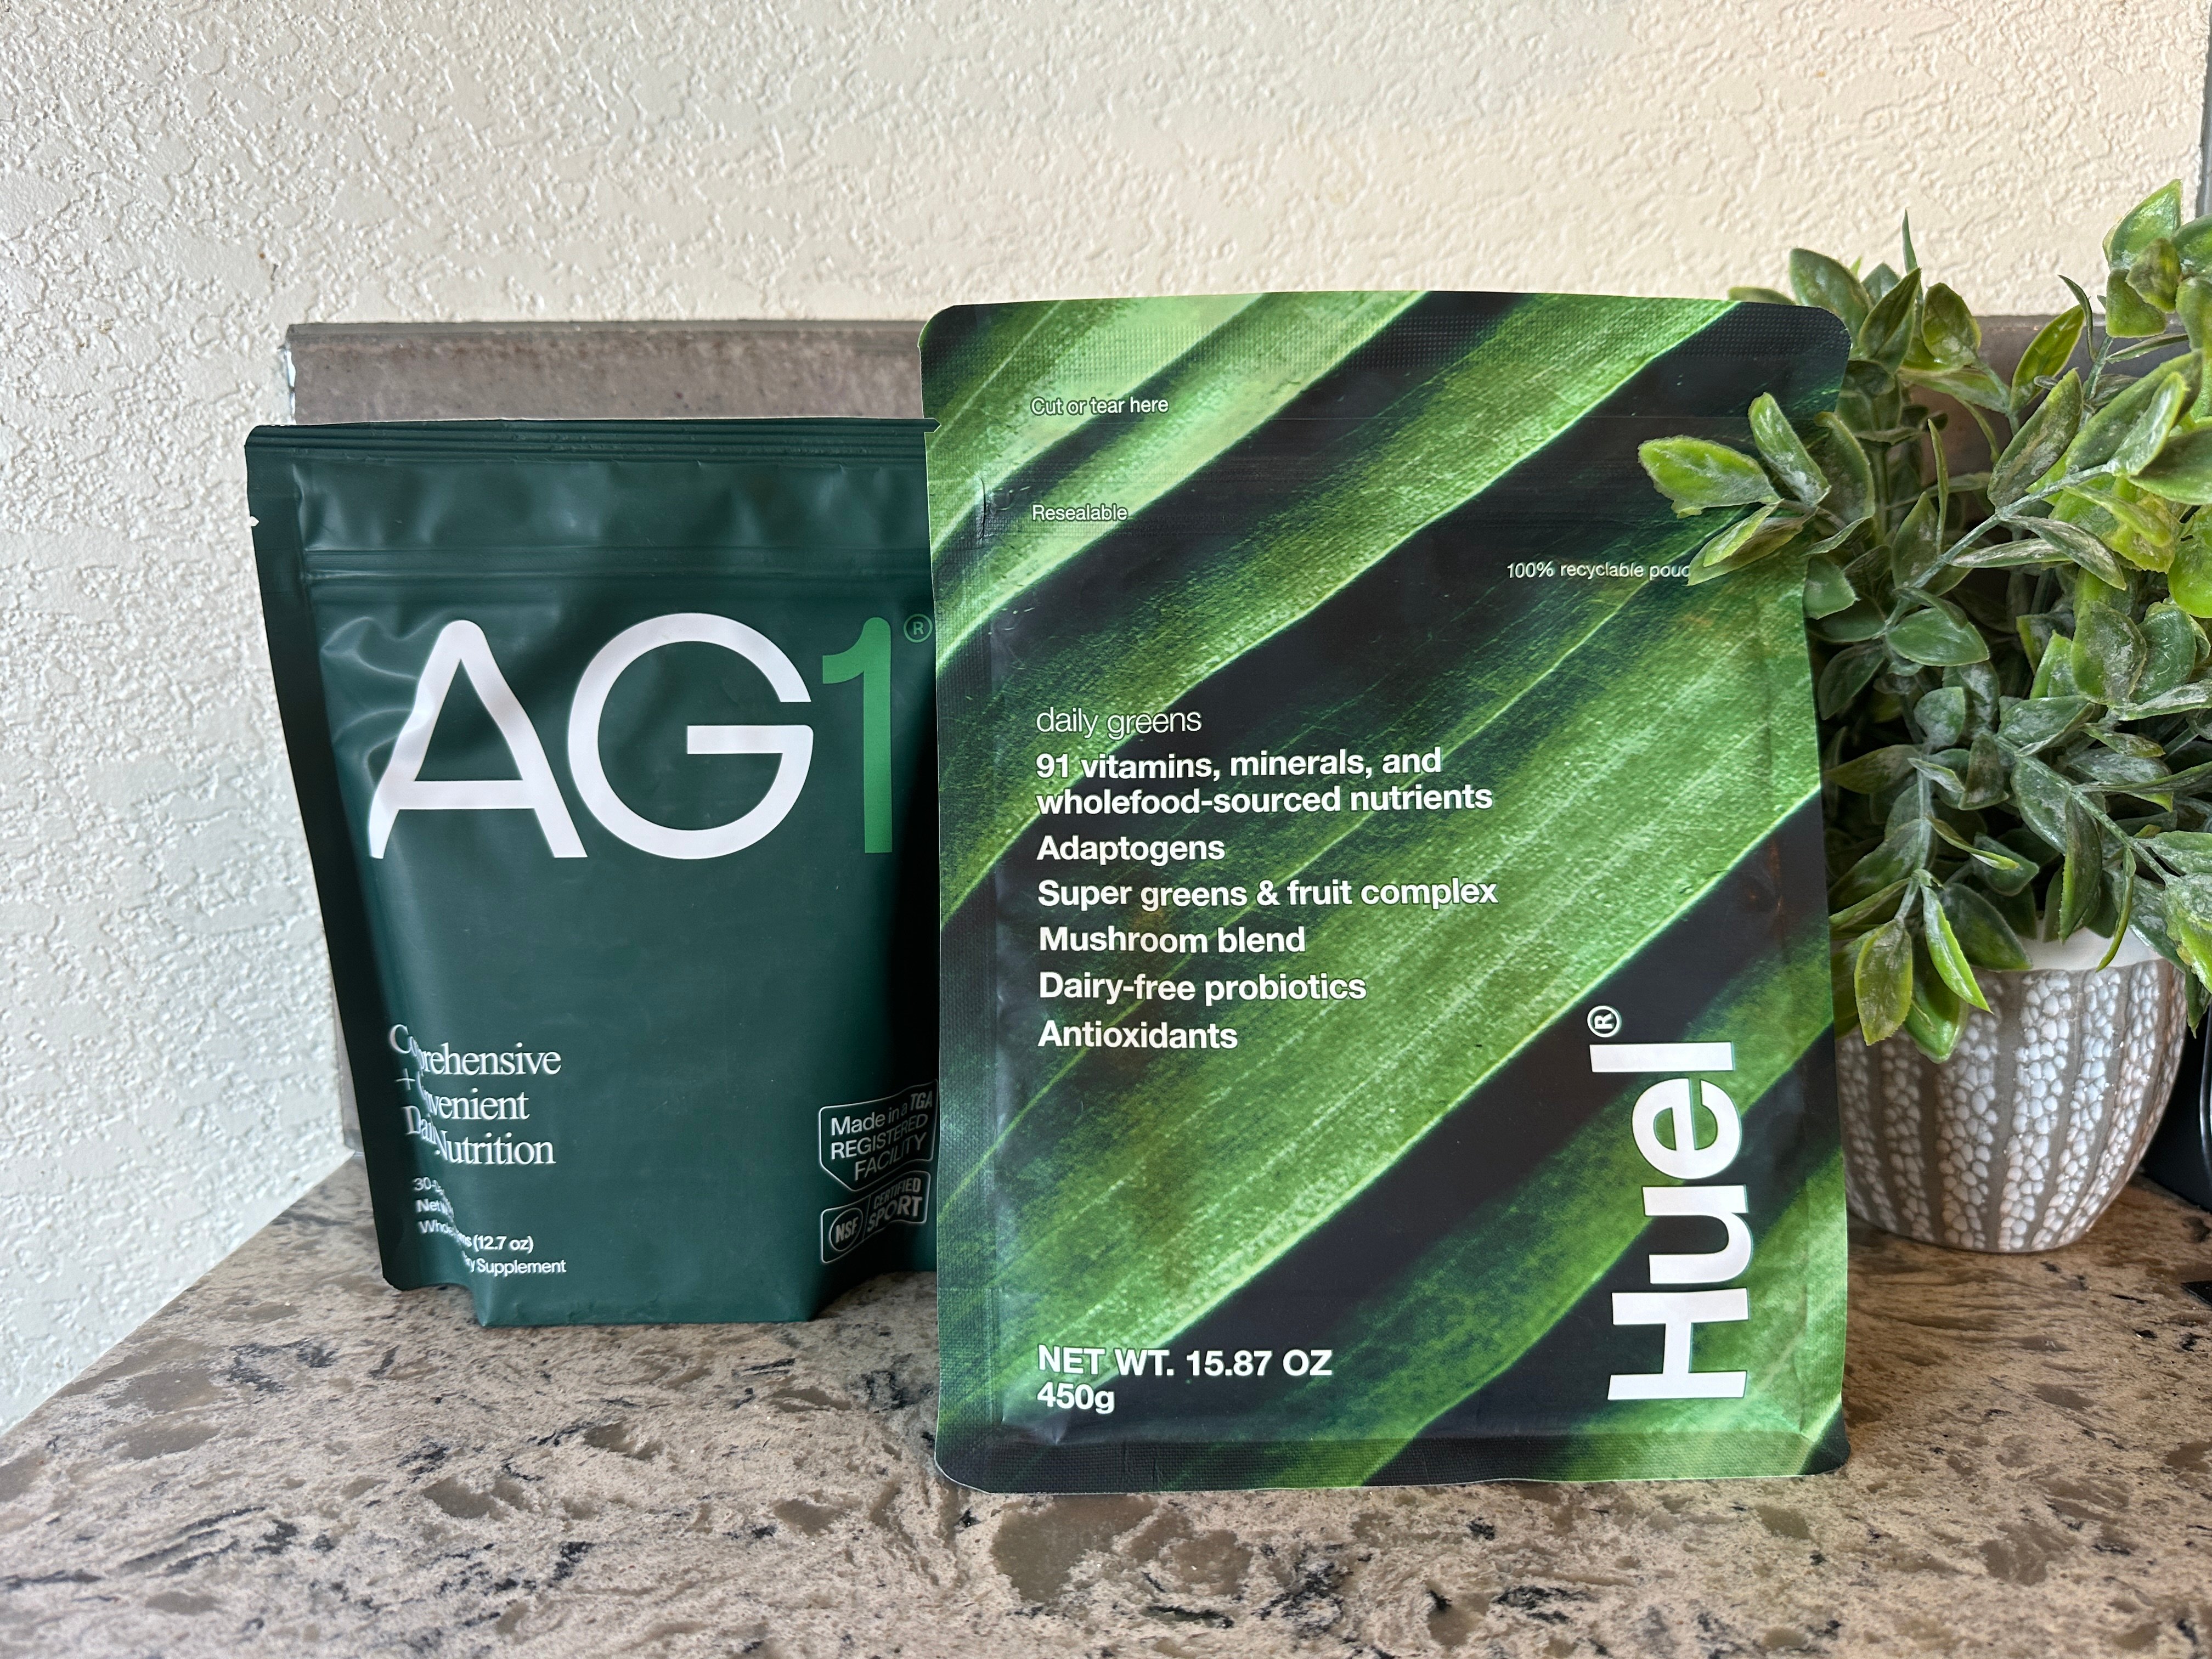 Huel Daily Greens vs. AG1: This Just Made My Morning Routine Even Easier